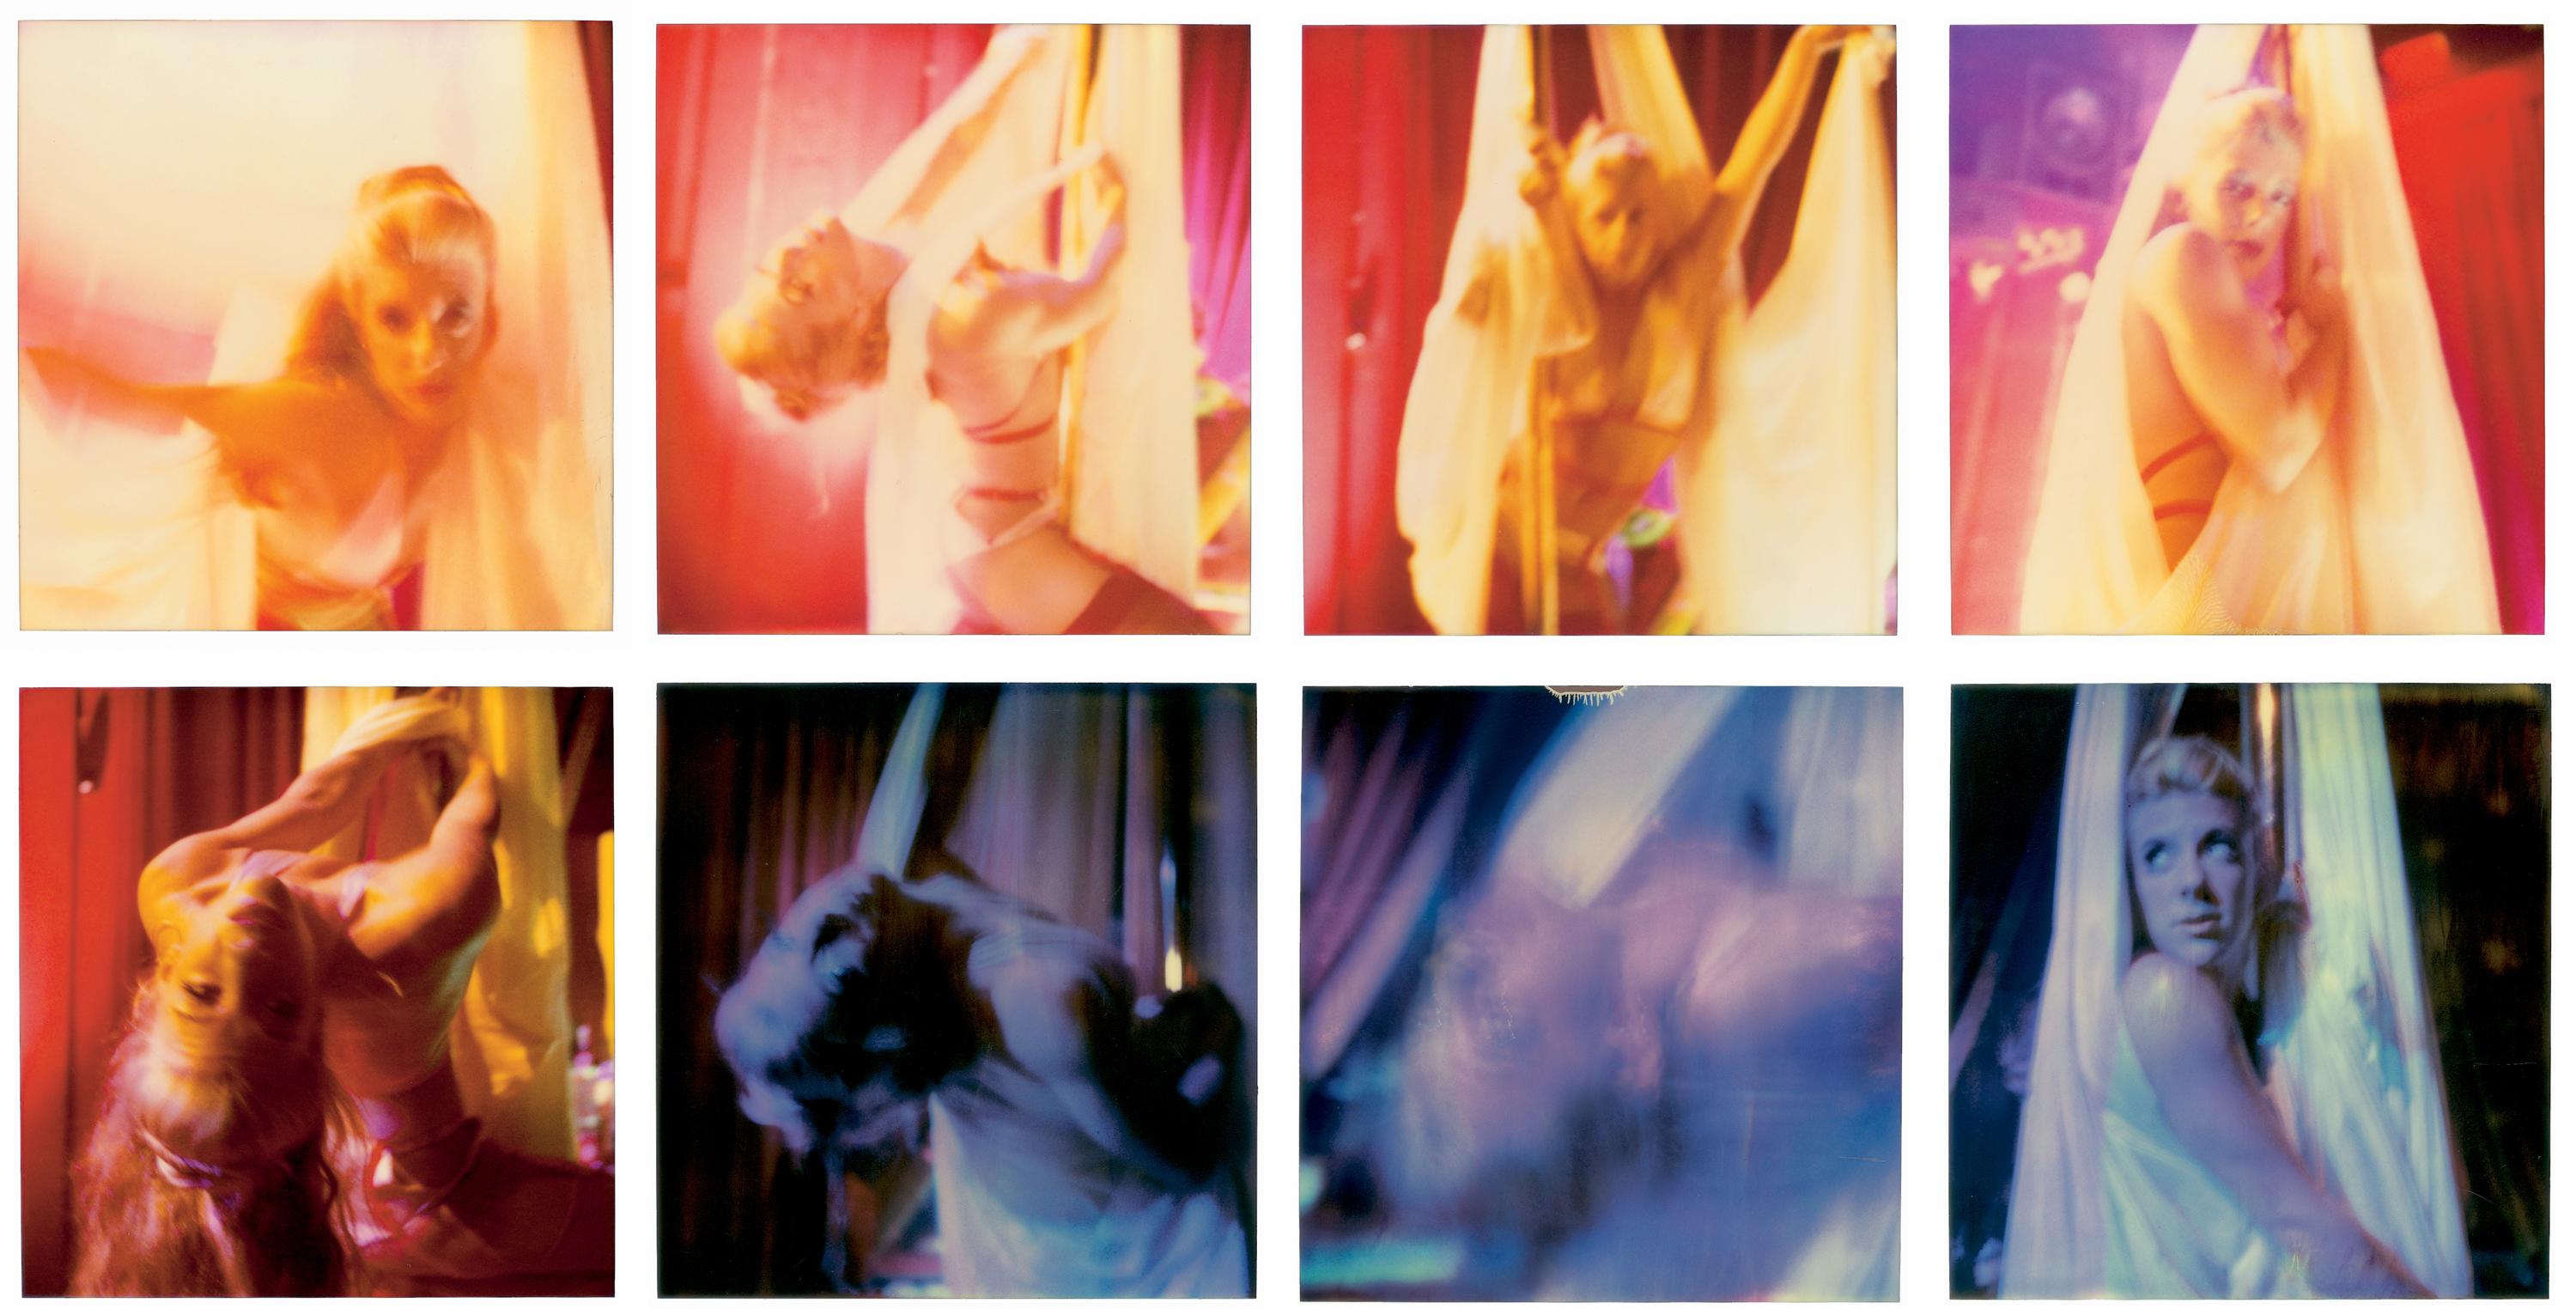 Dancer (Stay) - 8 pieces, analog, Polaroid, Contemporary, 21st Century, Color